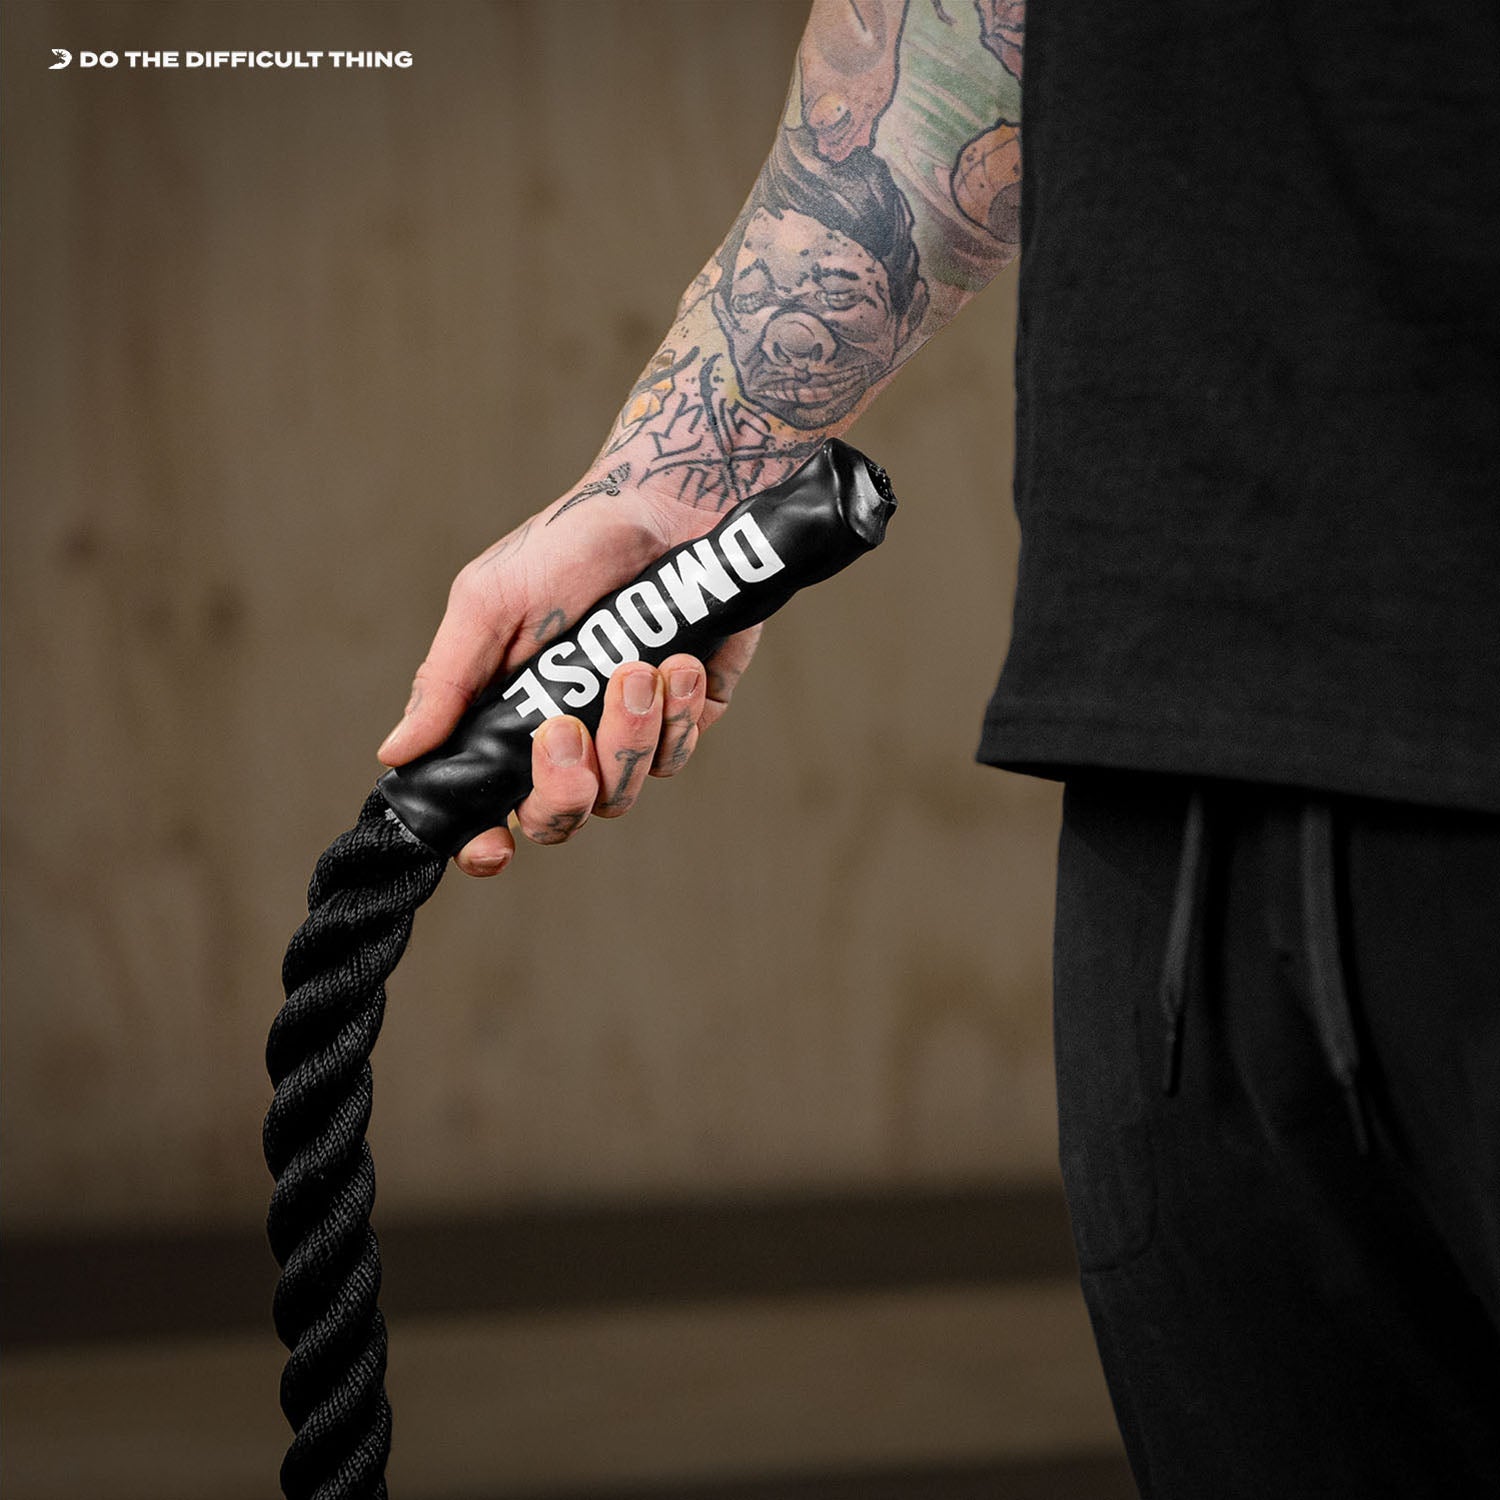 Revolutionize Your Fitness Game with DMoose Heavy Jump Rope!